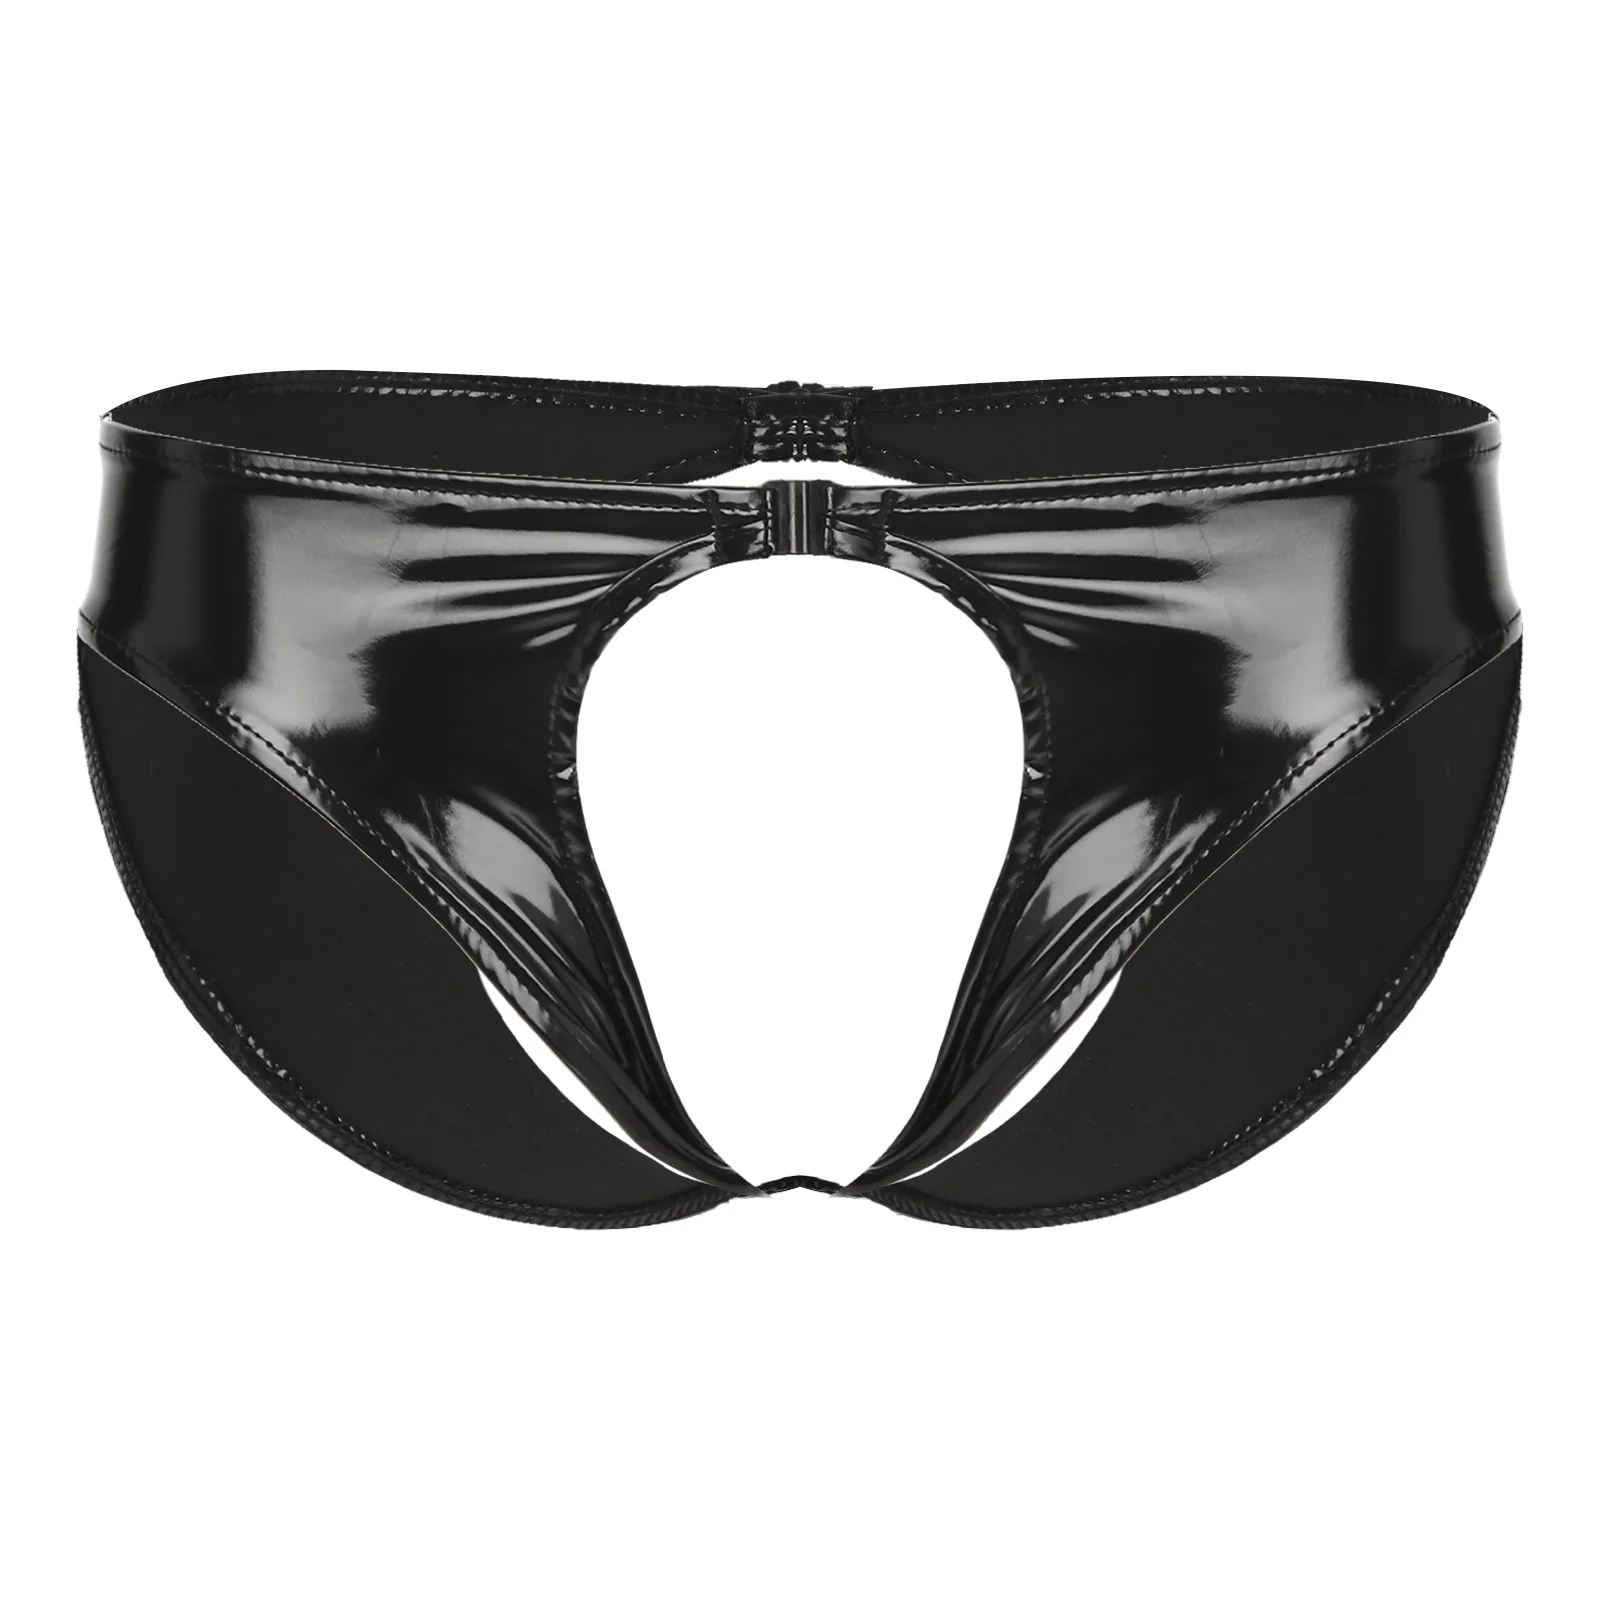 

Mens Lingerie Low Waist Open Butt Briefs Cutout Underwear Open Crotch Sissy Panties Wet Look Patent Leather Crotchless Thongs